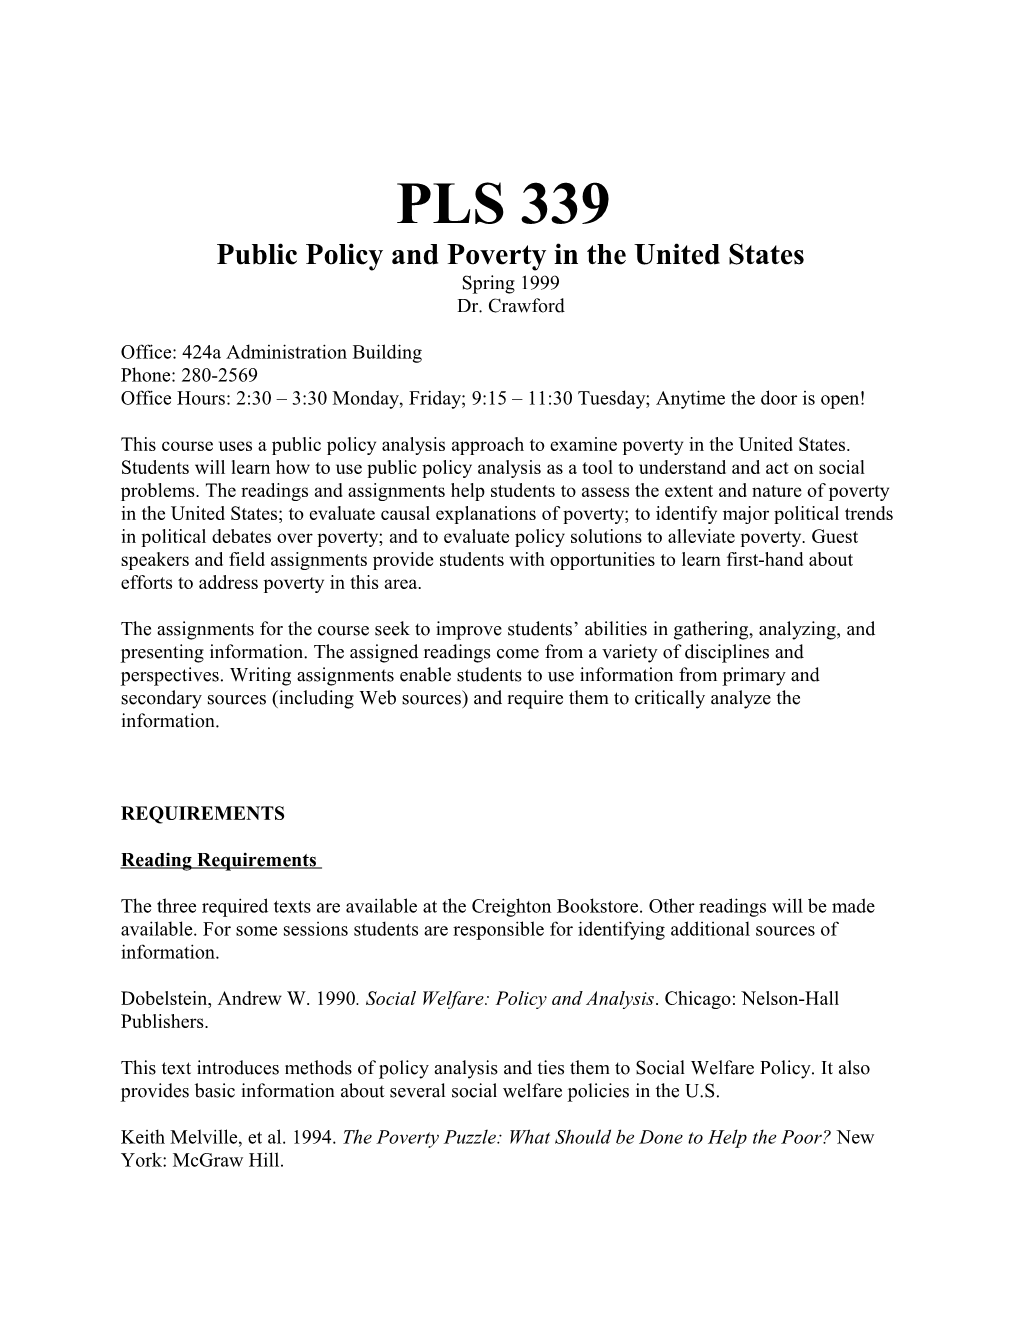 PLS 339 Public Policy and Poverty in the United States Spring 1999 Dr. Crawford